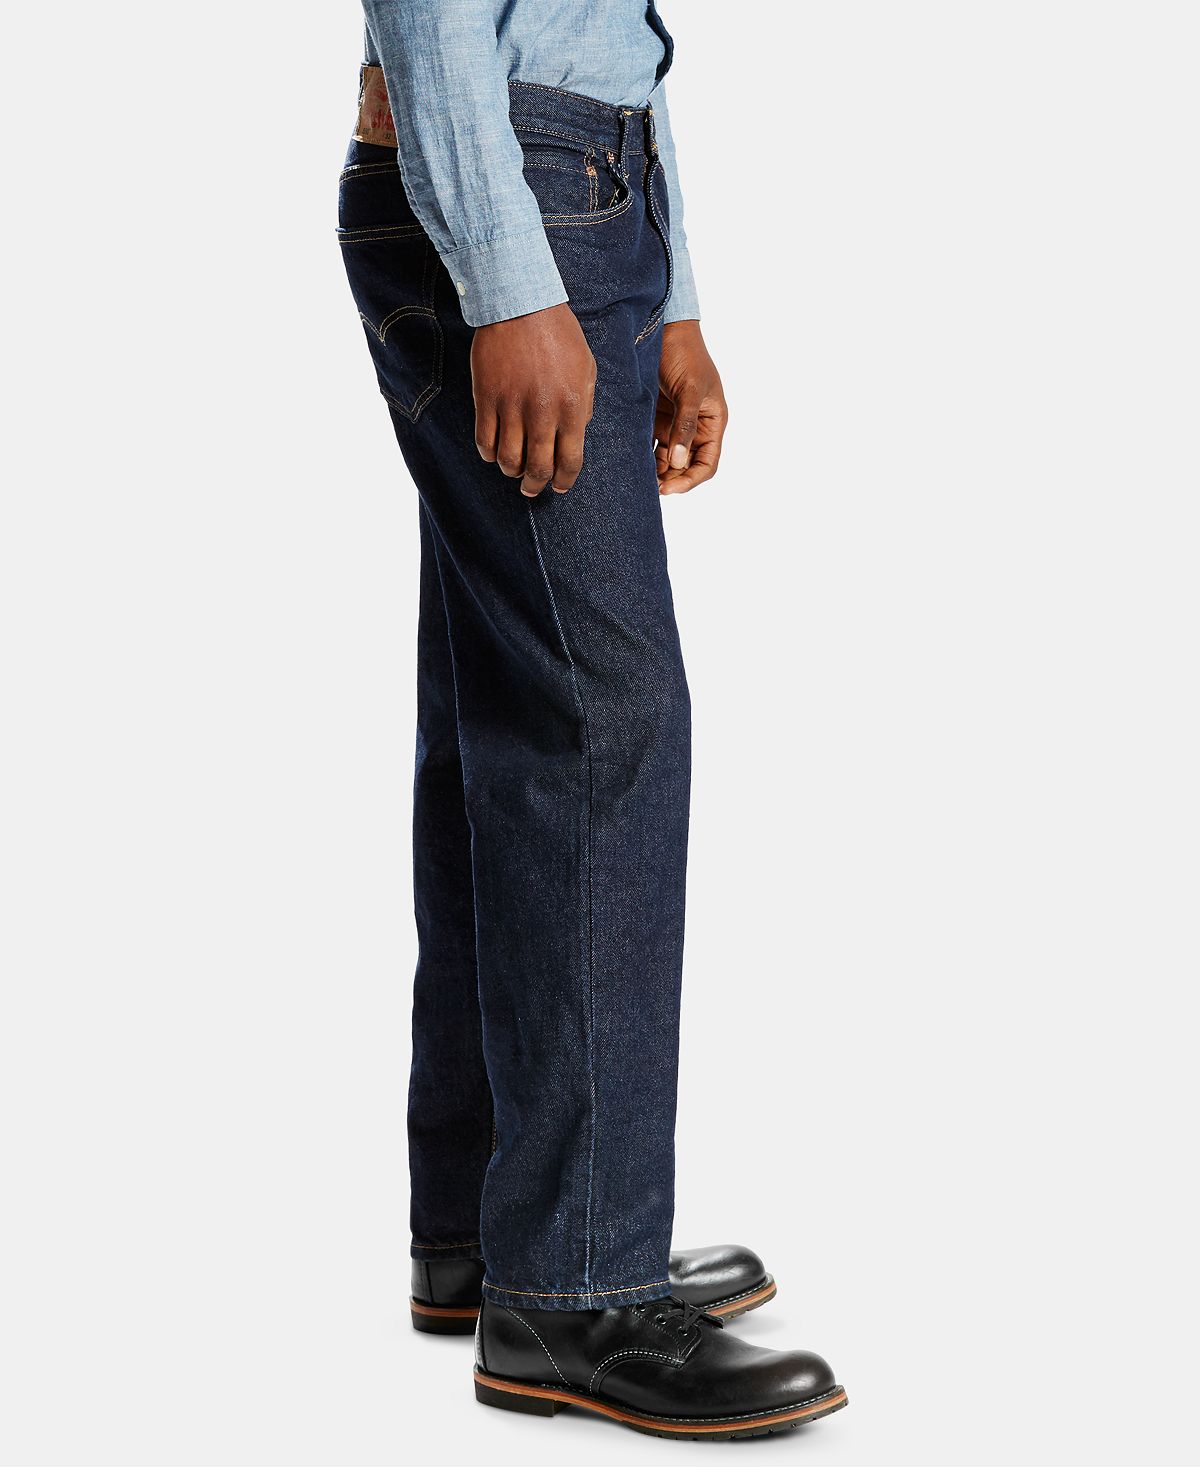 Levi's Big & Tall 550 Relaxed Fit Jeans Rinse